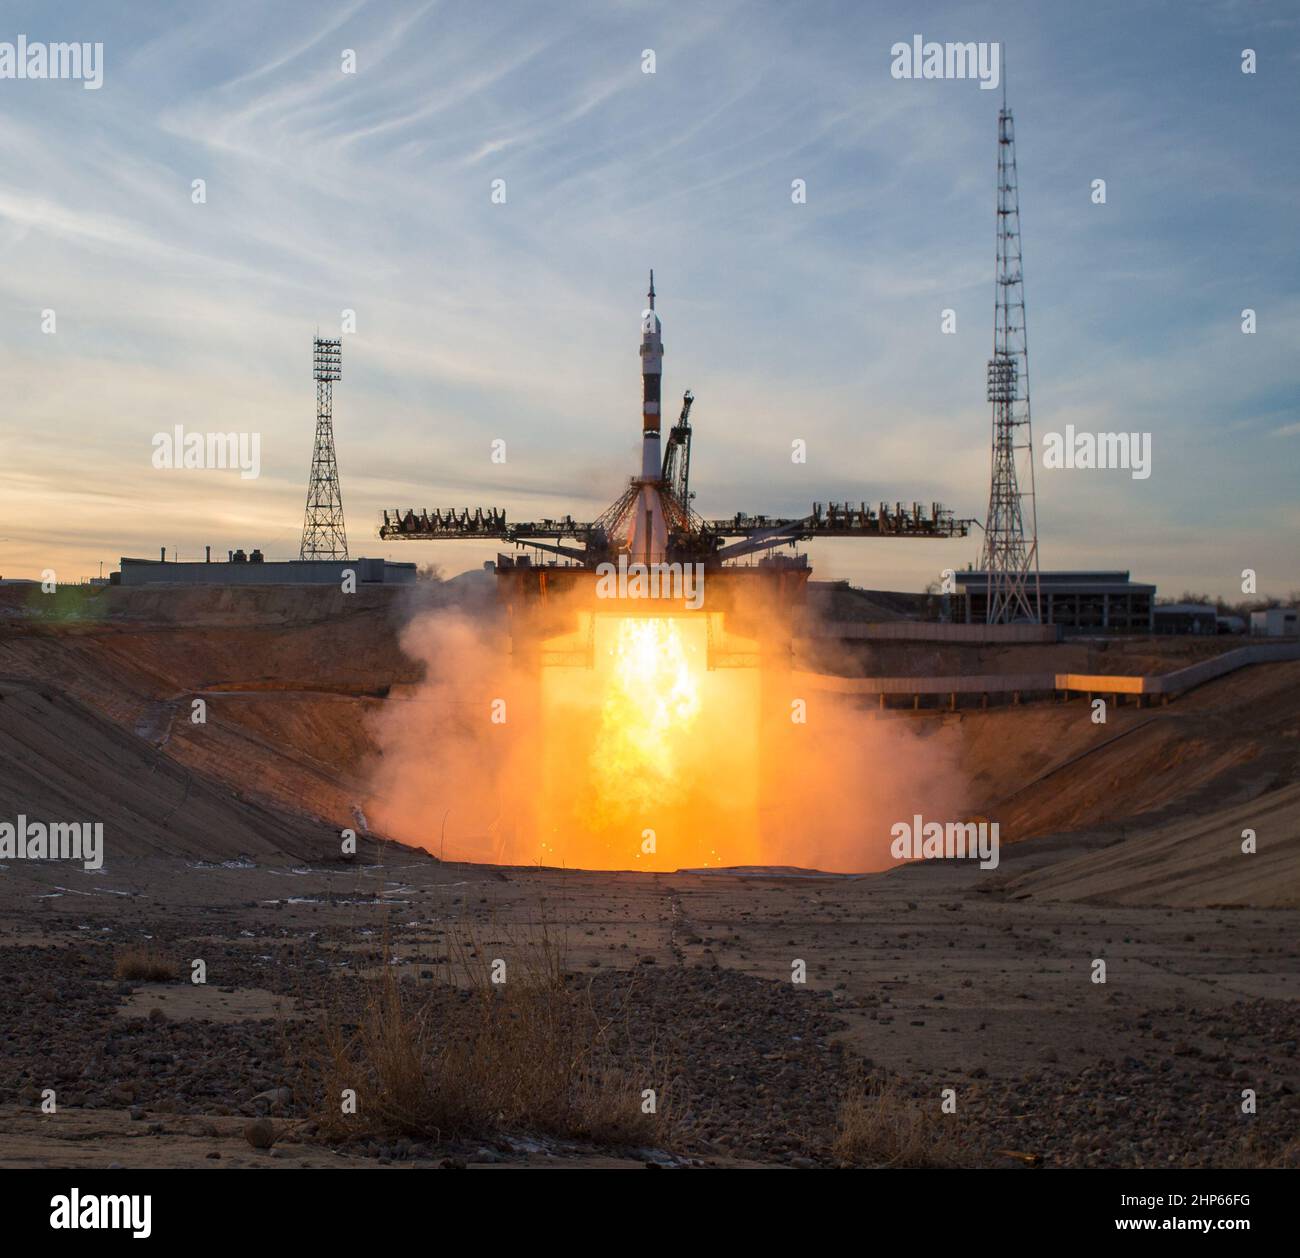 A Soyuz booster rocket launches the Soyuz MS-11 spacecraft from the Baikonur Cosmodrome in Kazakhstan on Monday, Dec. 3, 2018, Baikonur time, carrying Expedition 58 Soyuz Commander Oleg Kononenko of Roscosmos, Flight Engineer Anne McClain of NASA, and Flight Engineer David Saint-Jacques of the Canadian Space Agency (CSA) into orbit to begin their six and a half month mission on the International Space Station Stock Photo